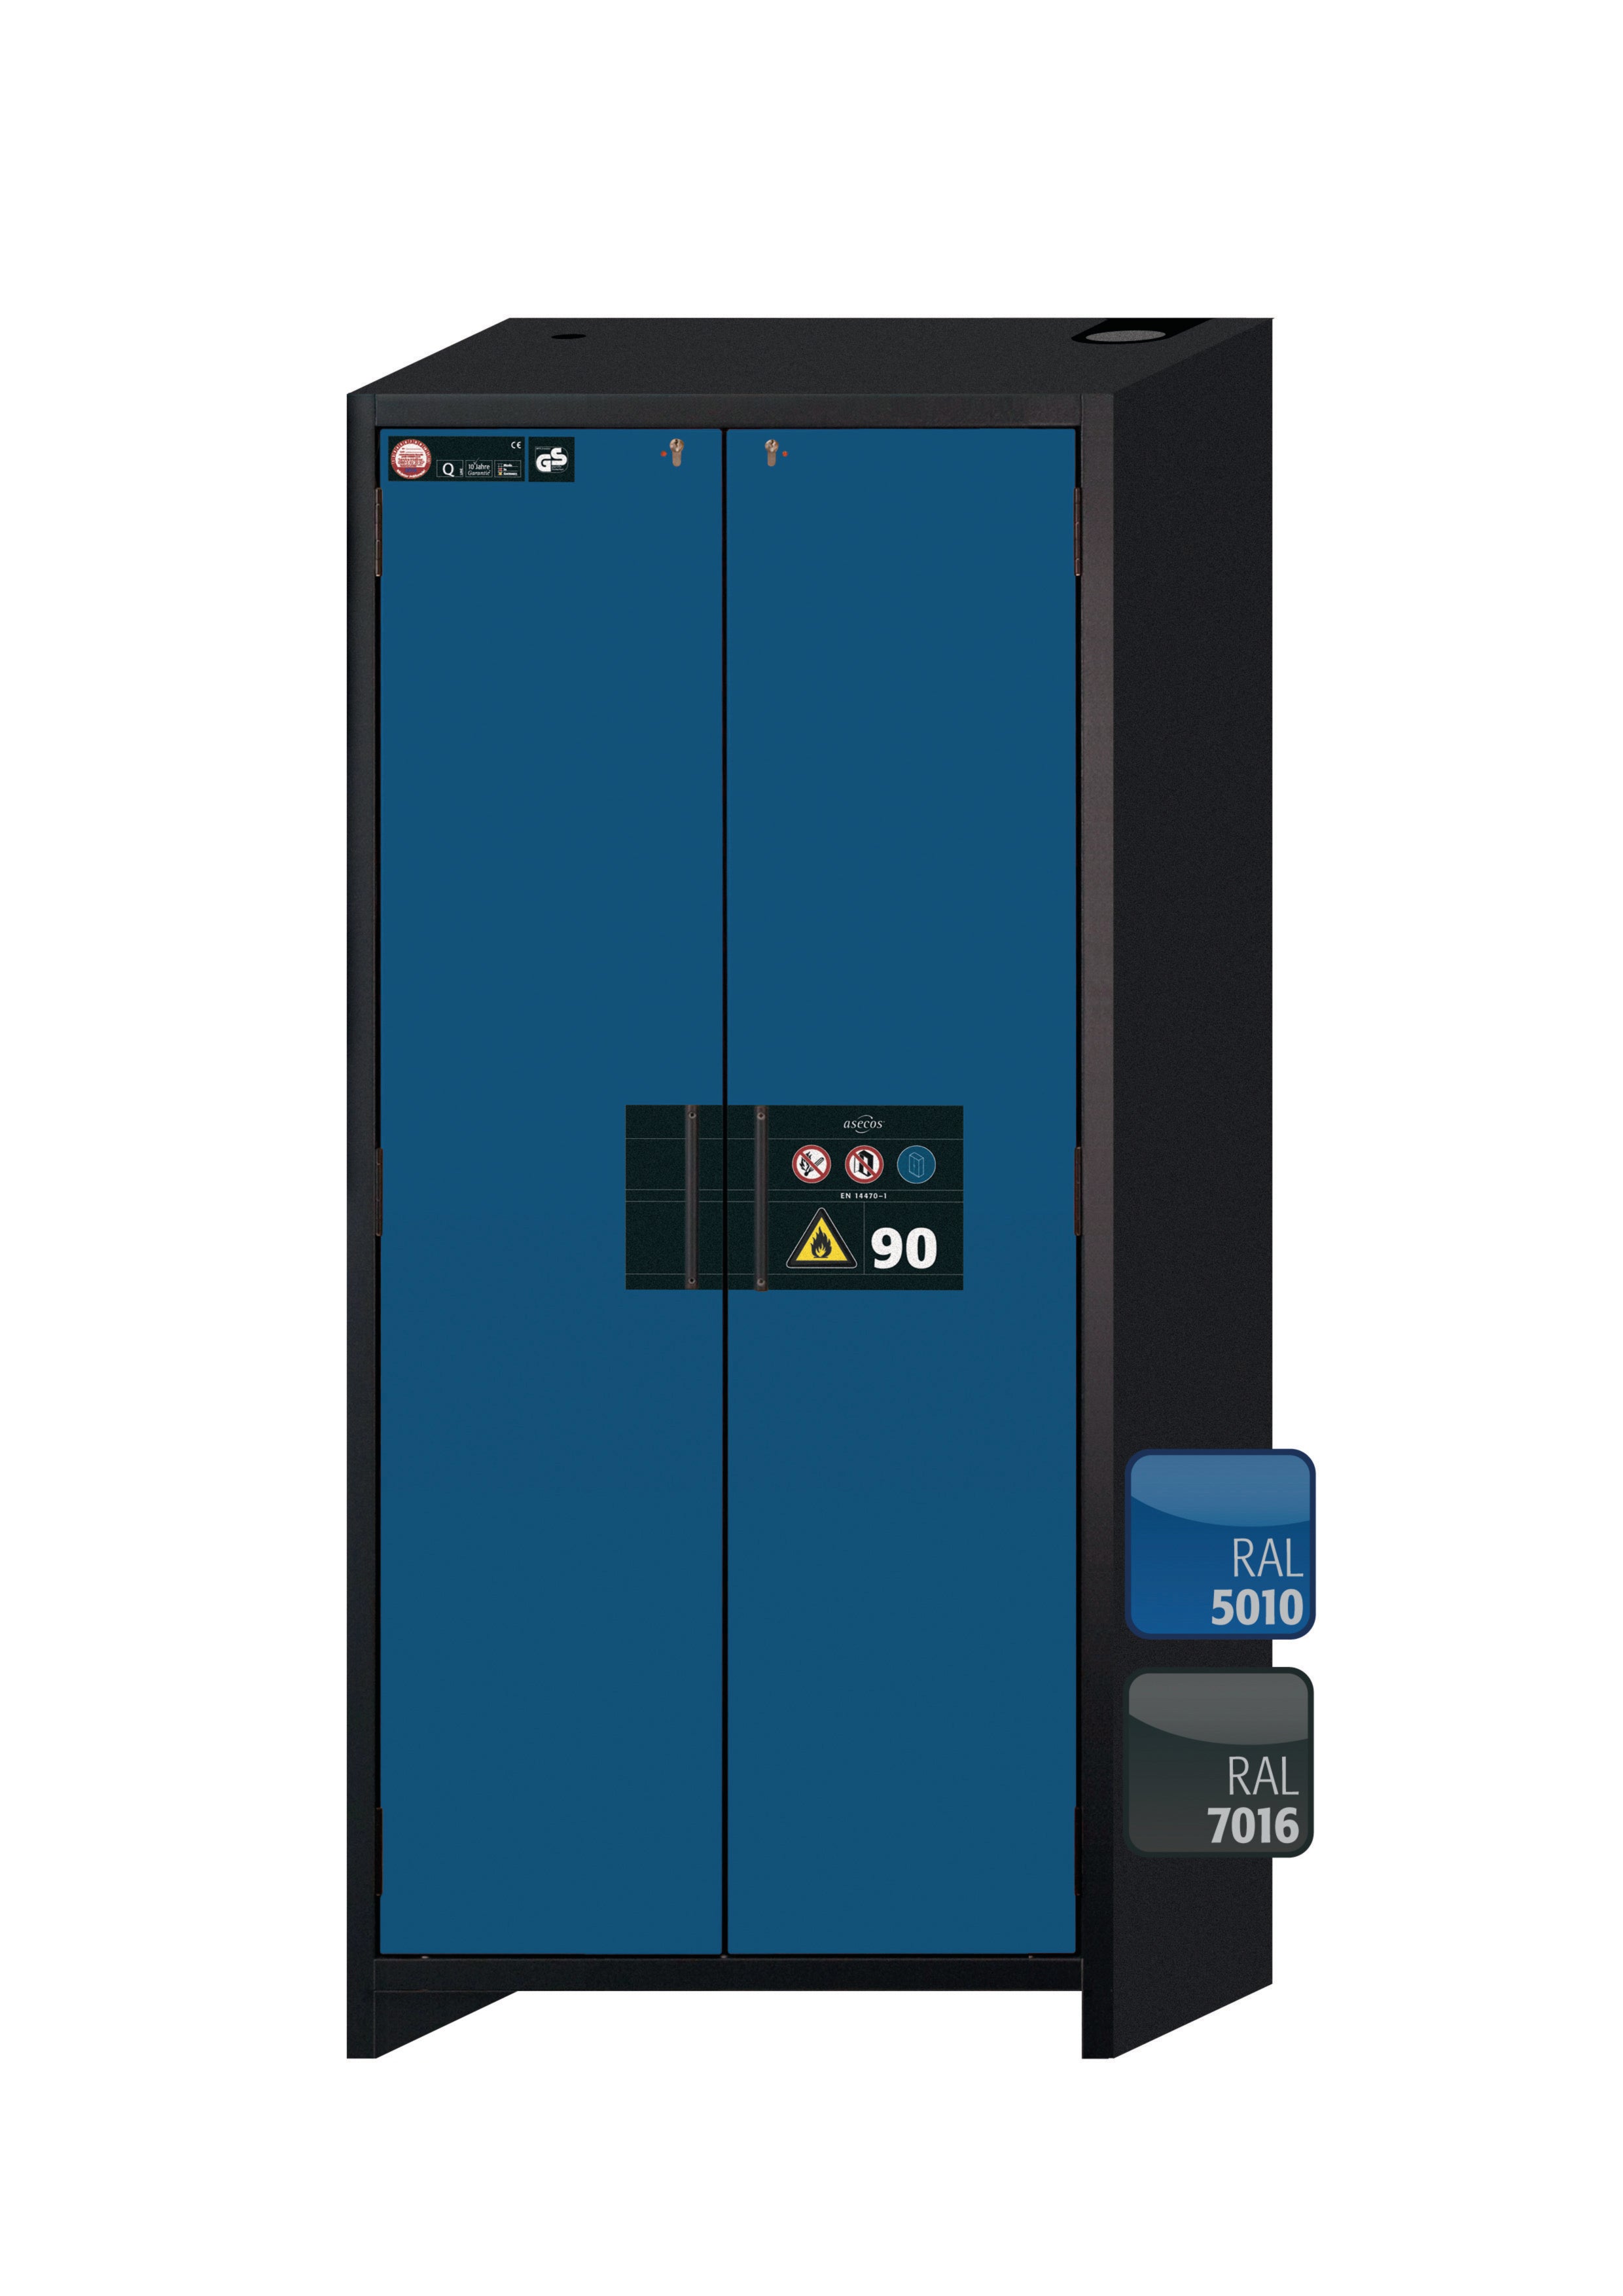 Type 90 safety storage cabinet Q-CLASSIC-90 model Q90.195.090 in gentian blue RAL 5010 with 4x drawer (standard) (stainless steel 1.4301),